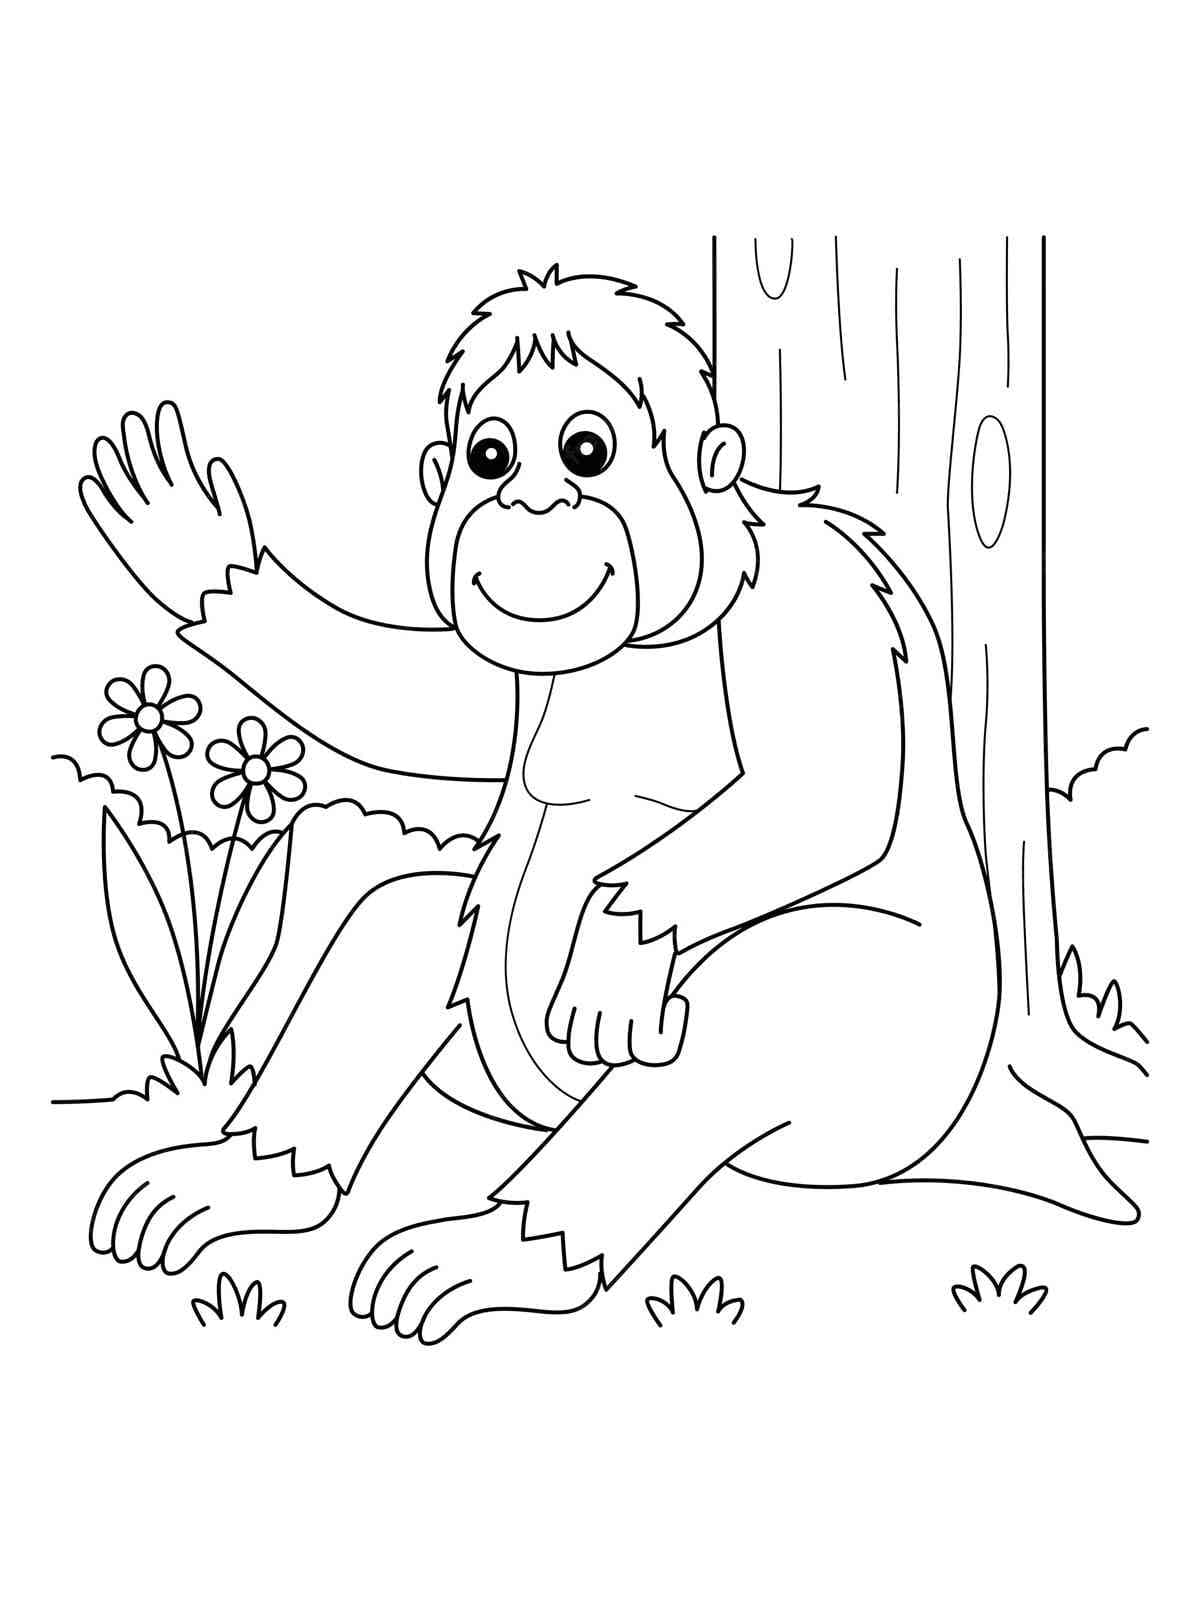 Orang-outan Souriant coloring page